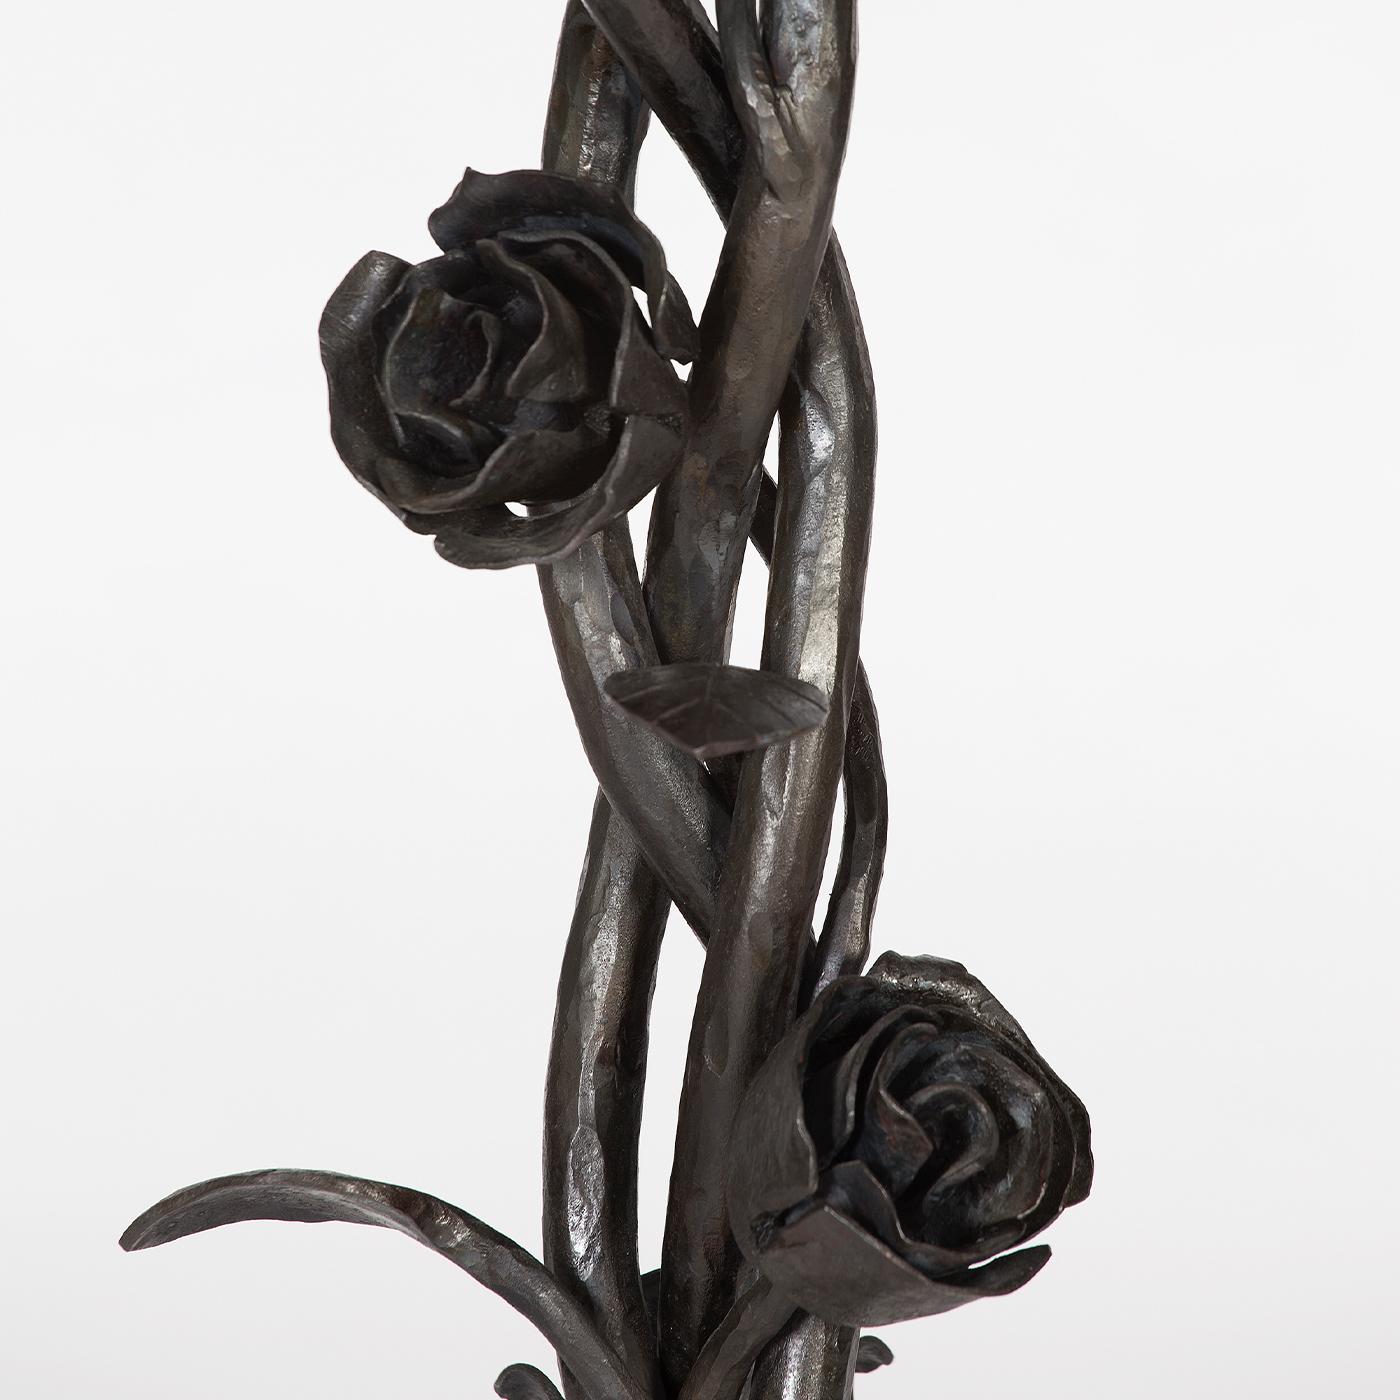 Utmost elegance defines this extraordinary ornamental side table handmade of beaten iron, finished with clear acrylic paint and decorated with rosebuds blooming from the three intertwined branches. Timelessly sophisticated, it is suitable for any